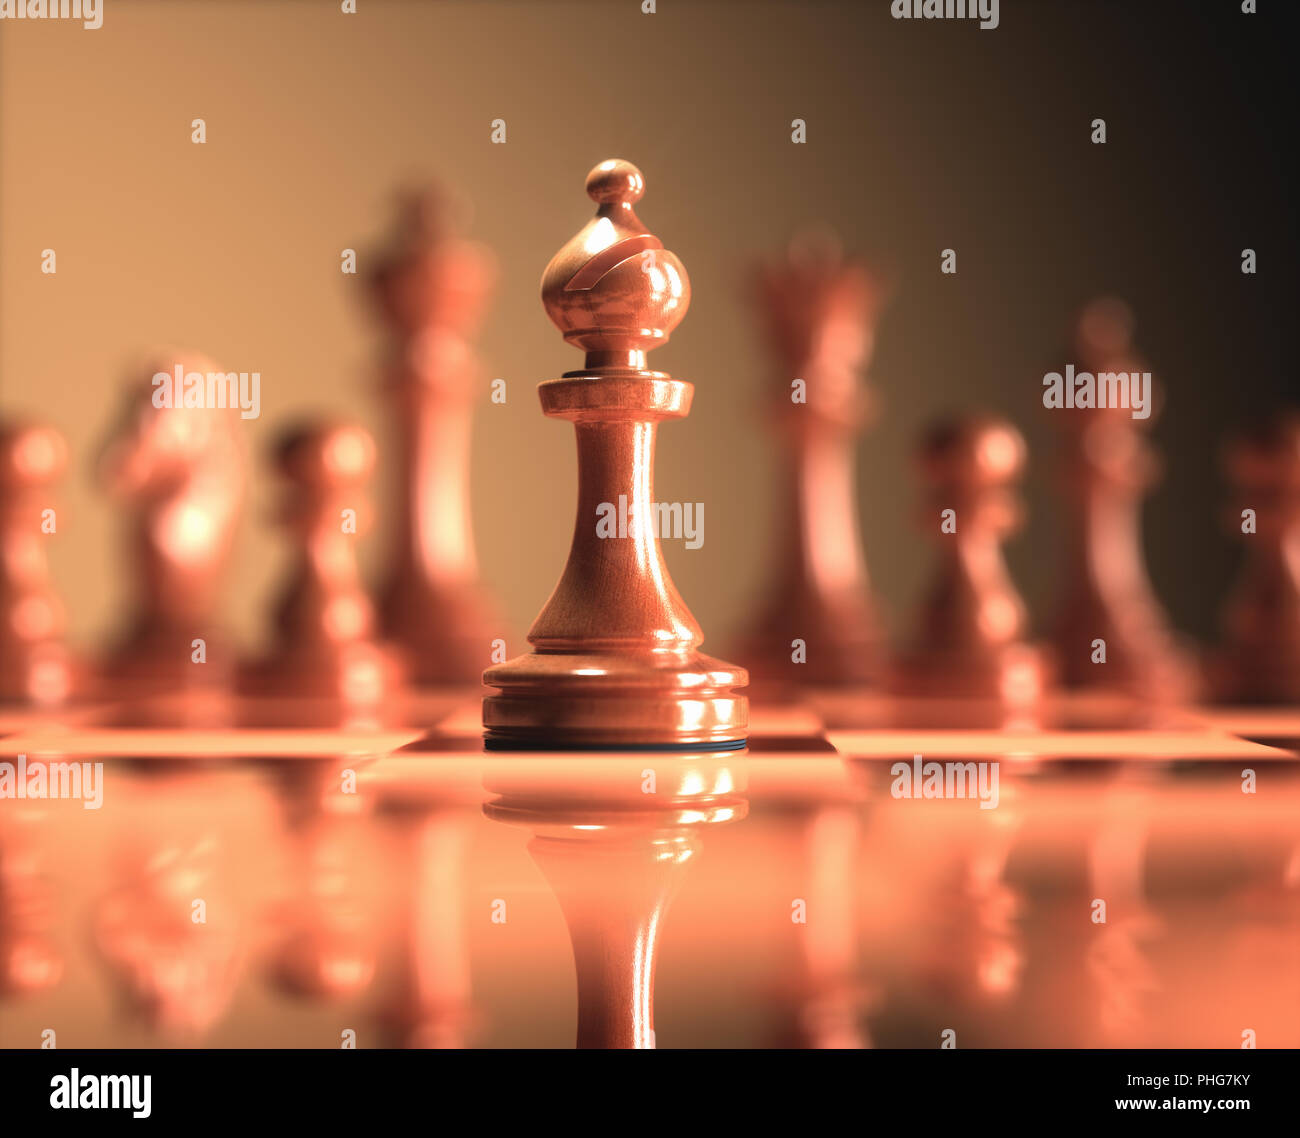 The Bishop in highlight. Pieces of chess game, image with shallow depth of field. Stock Photo